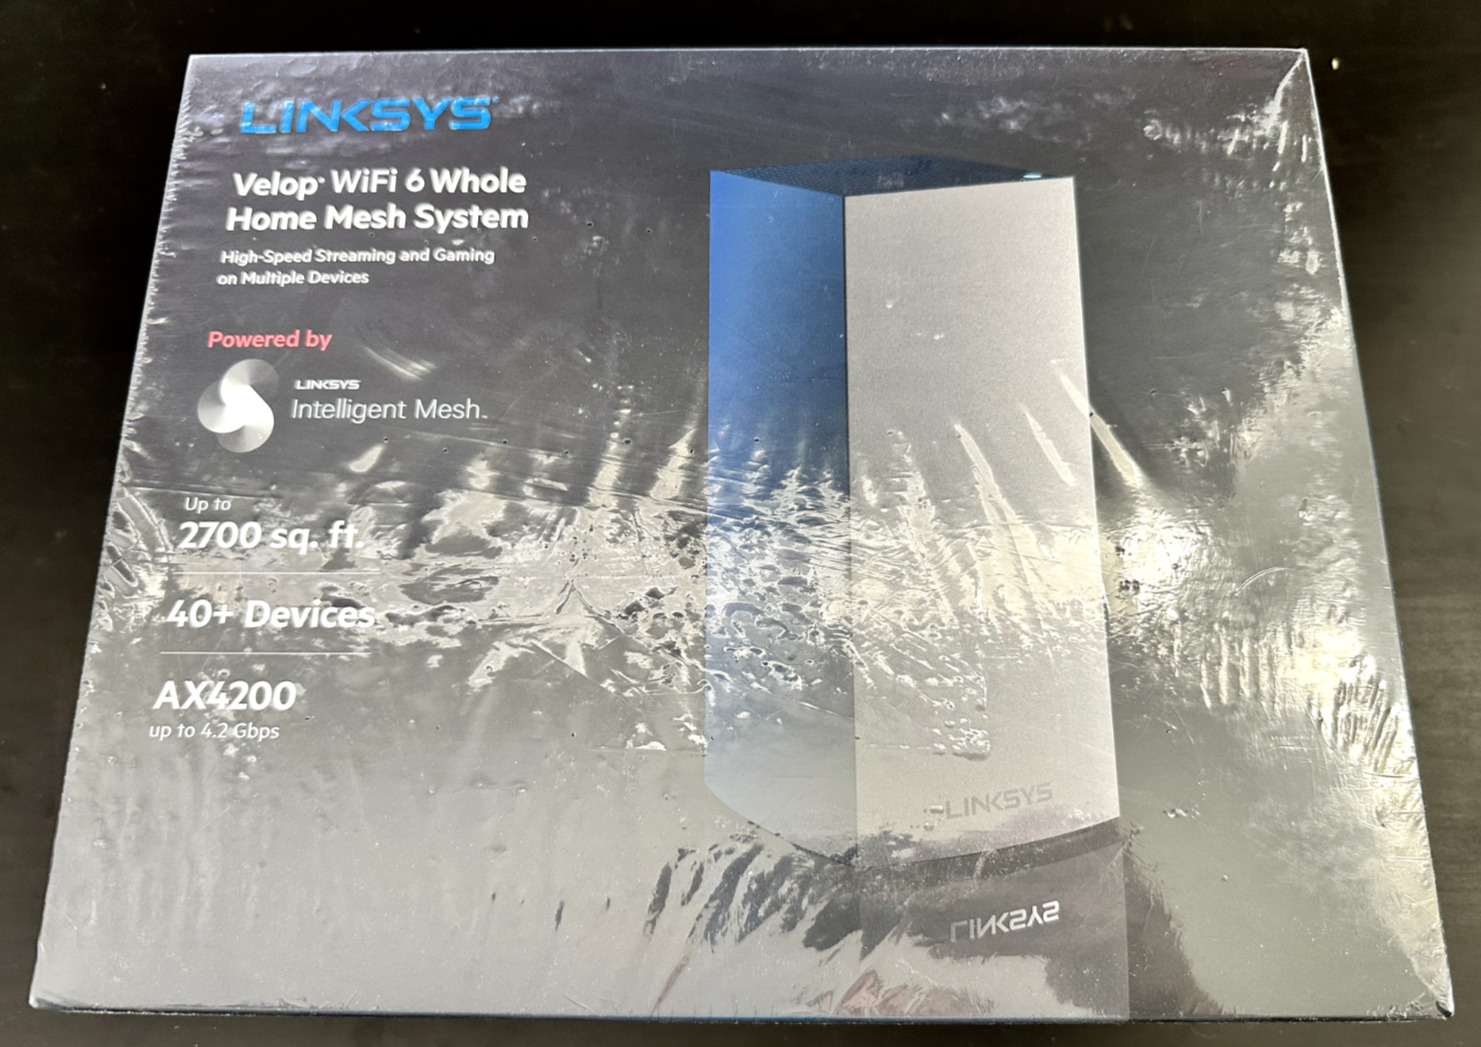 New Sealed Linksys Velop WiFi 6 Whole Home Mesh System AX4200 NIB Single Device